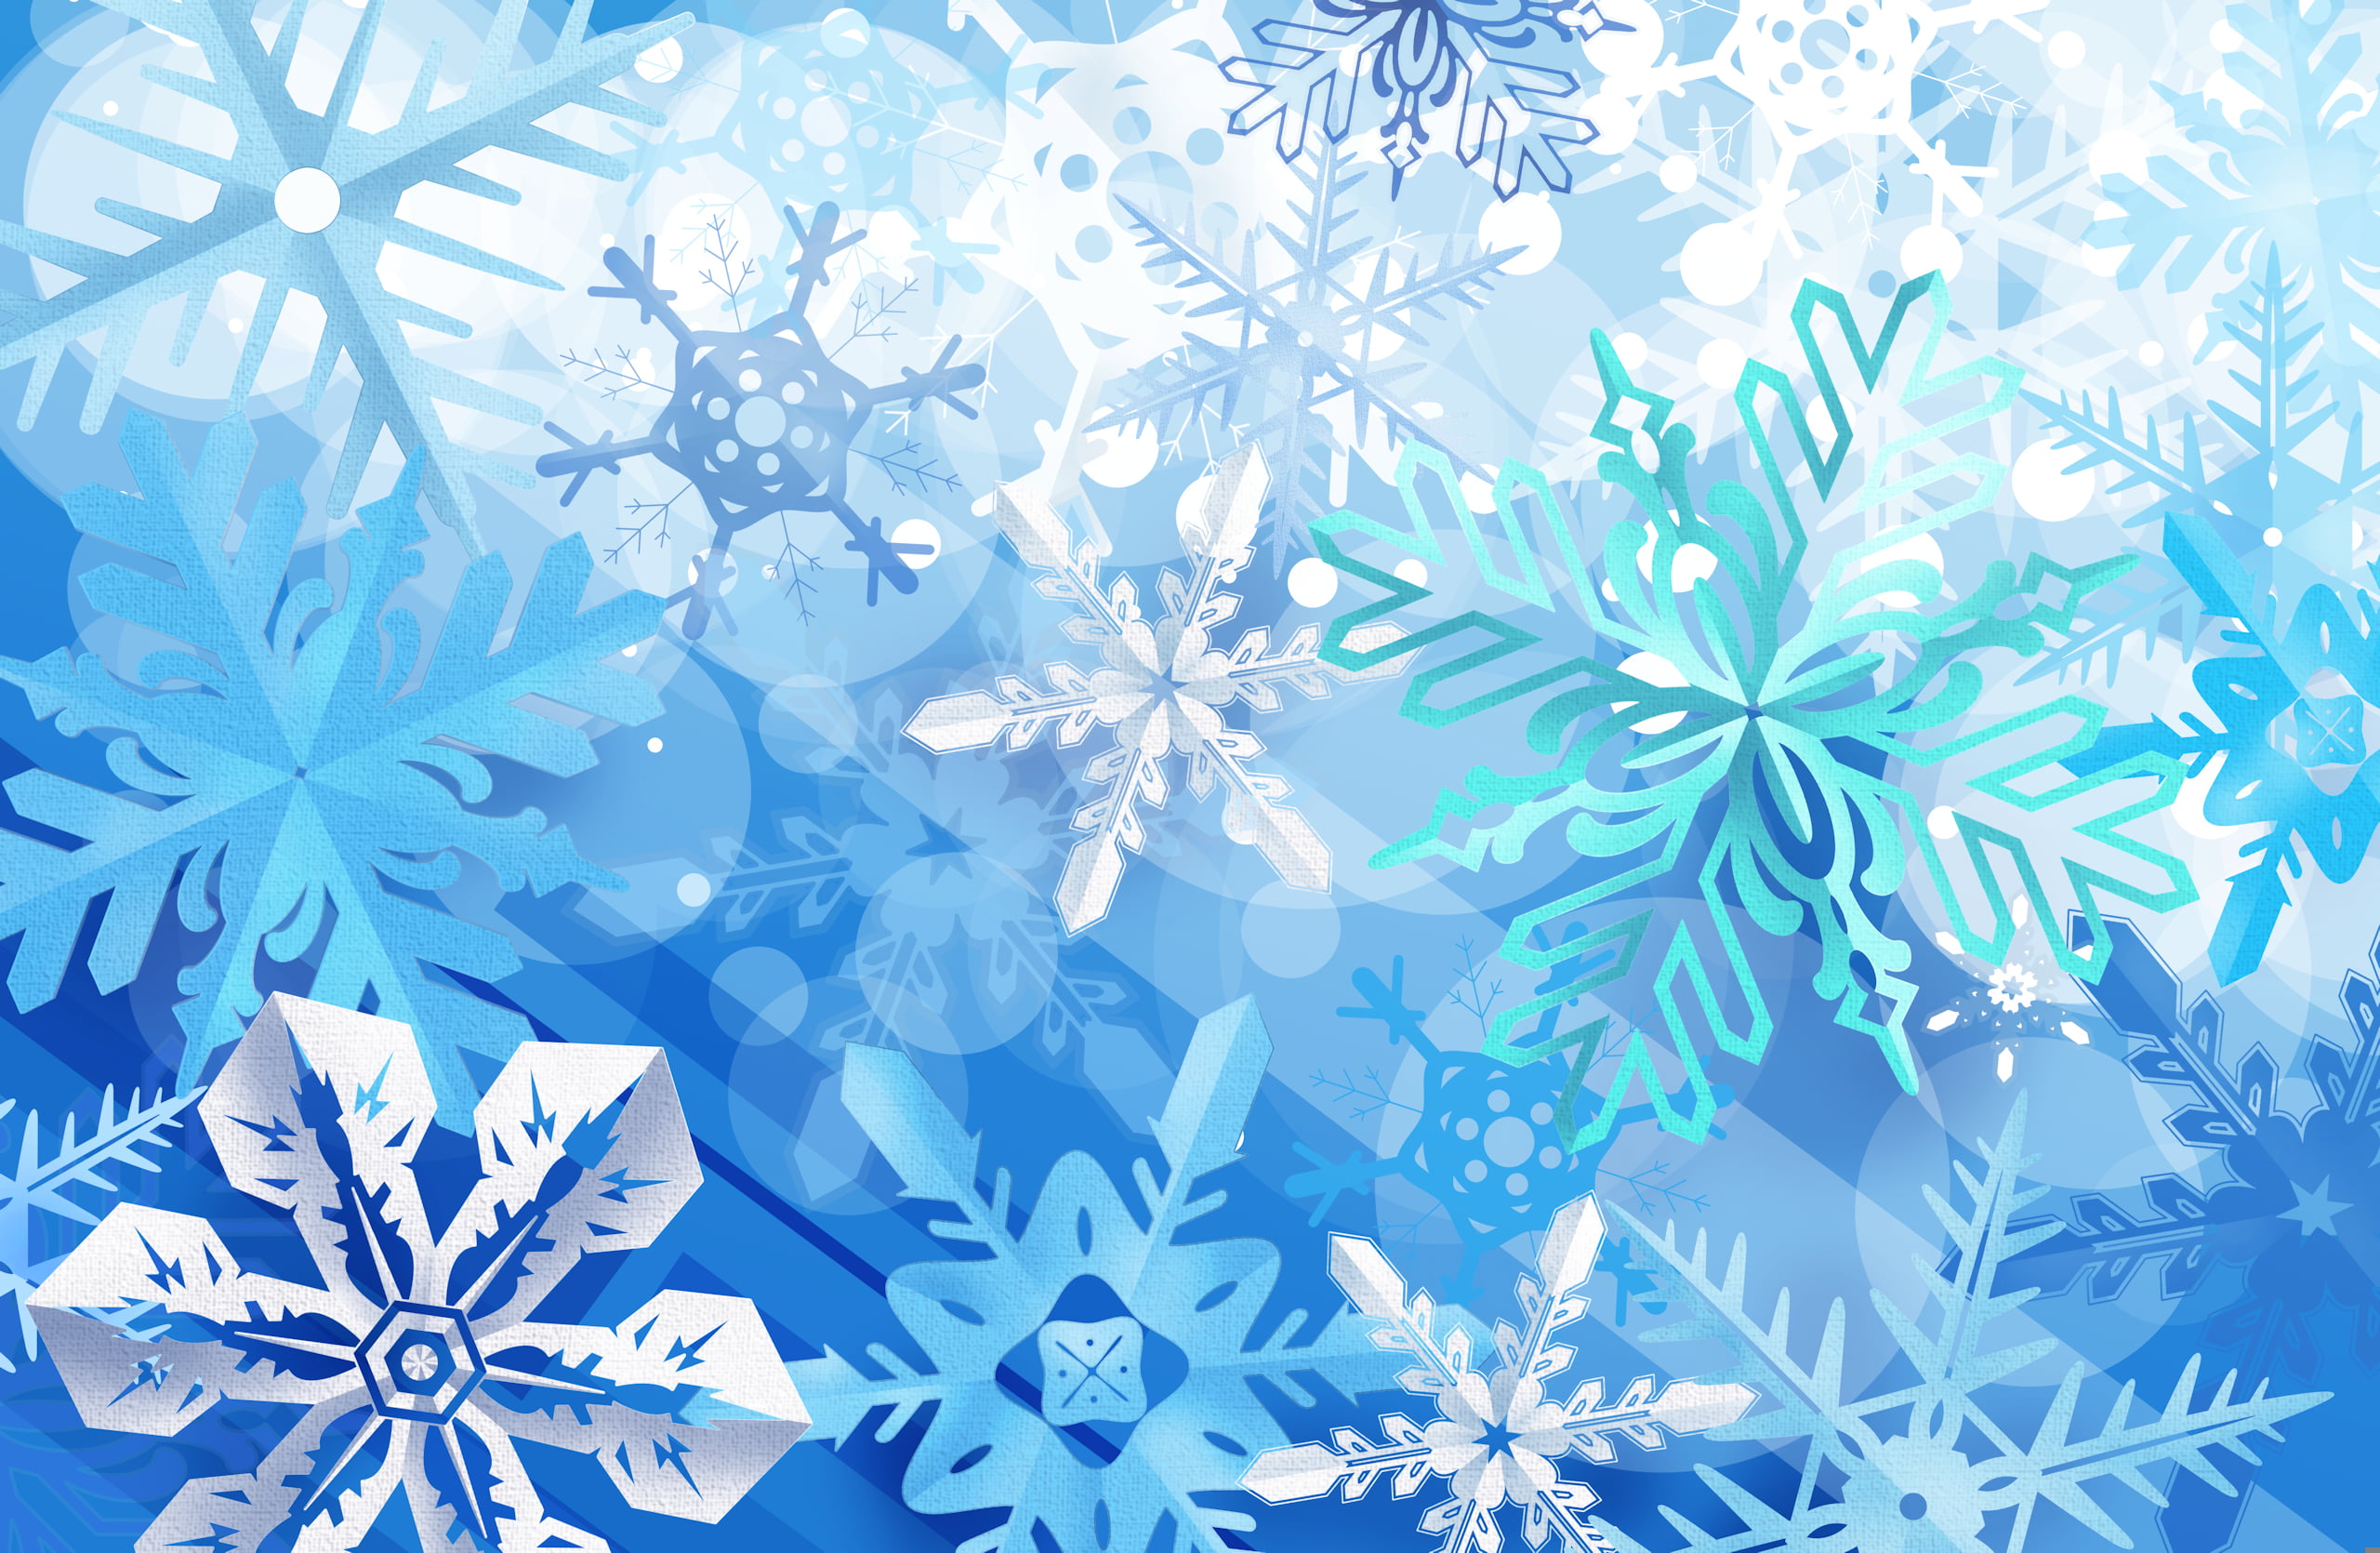 blue snow flakes digital wallpaper, winter, snowflakes, backgrounds